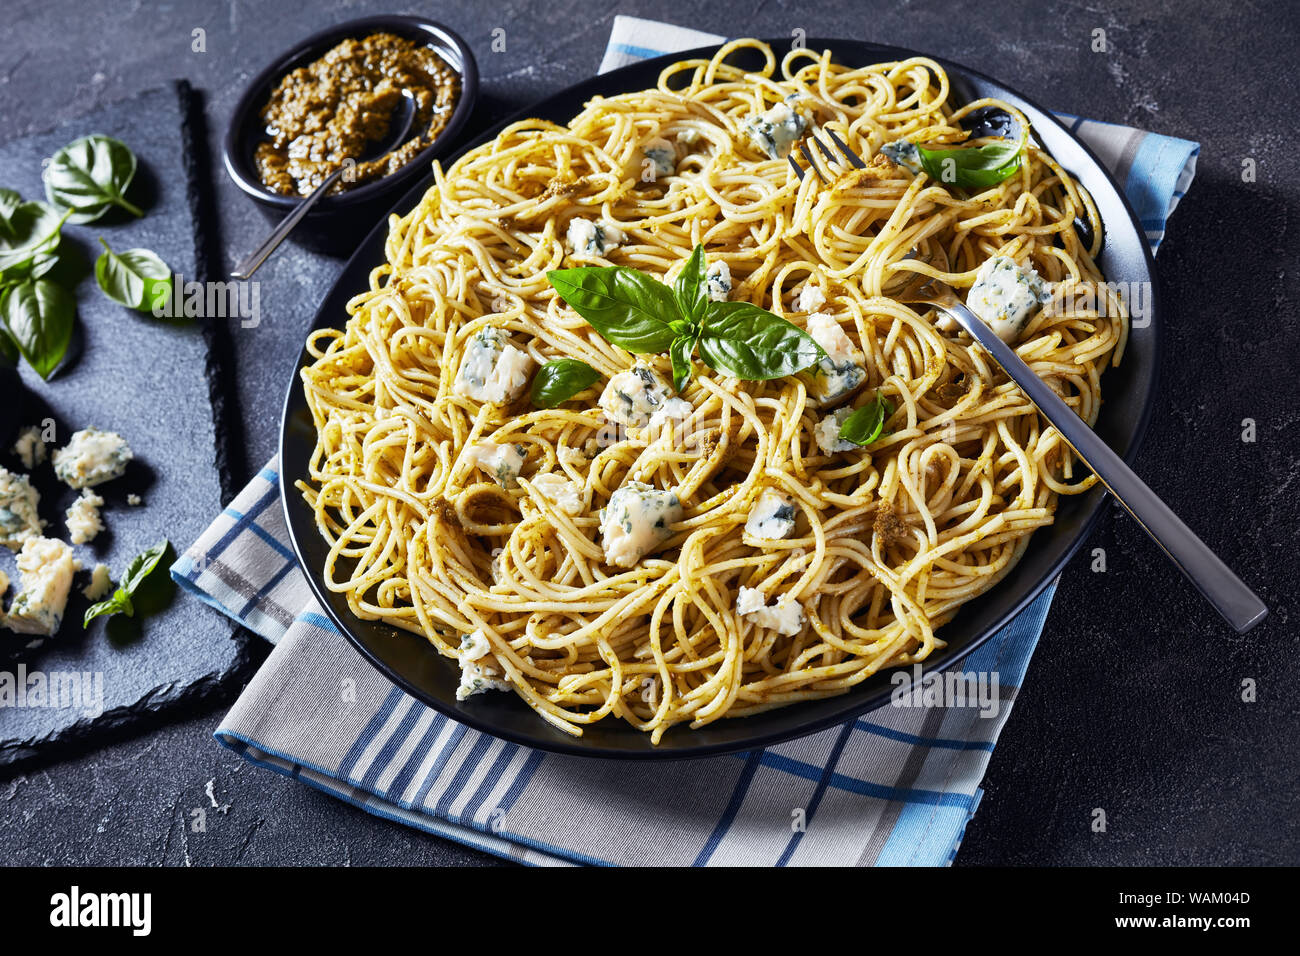 close-up of delicious Spaghetti with basil pesto and blue cheese on a black plate on a concrete table with pesto in a black bowl, Italian cuisine, hor Stock Photo